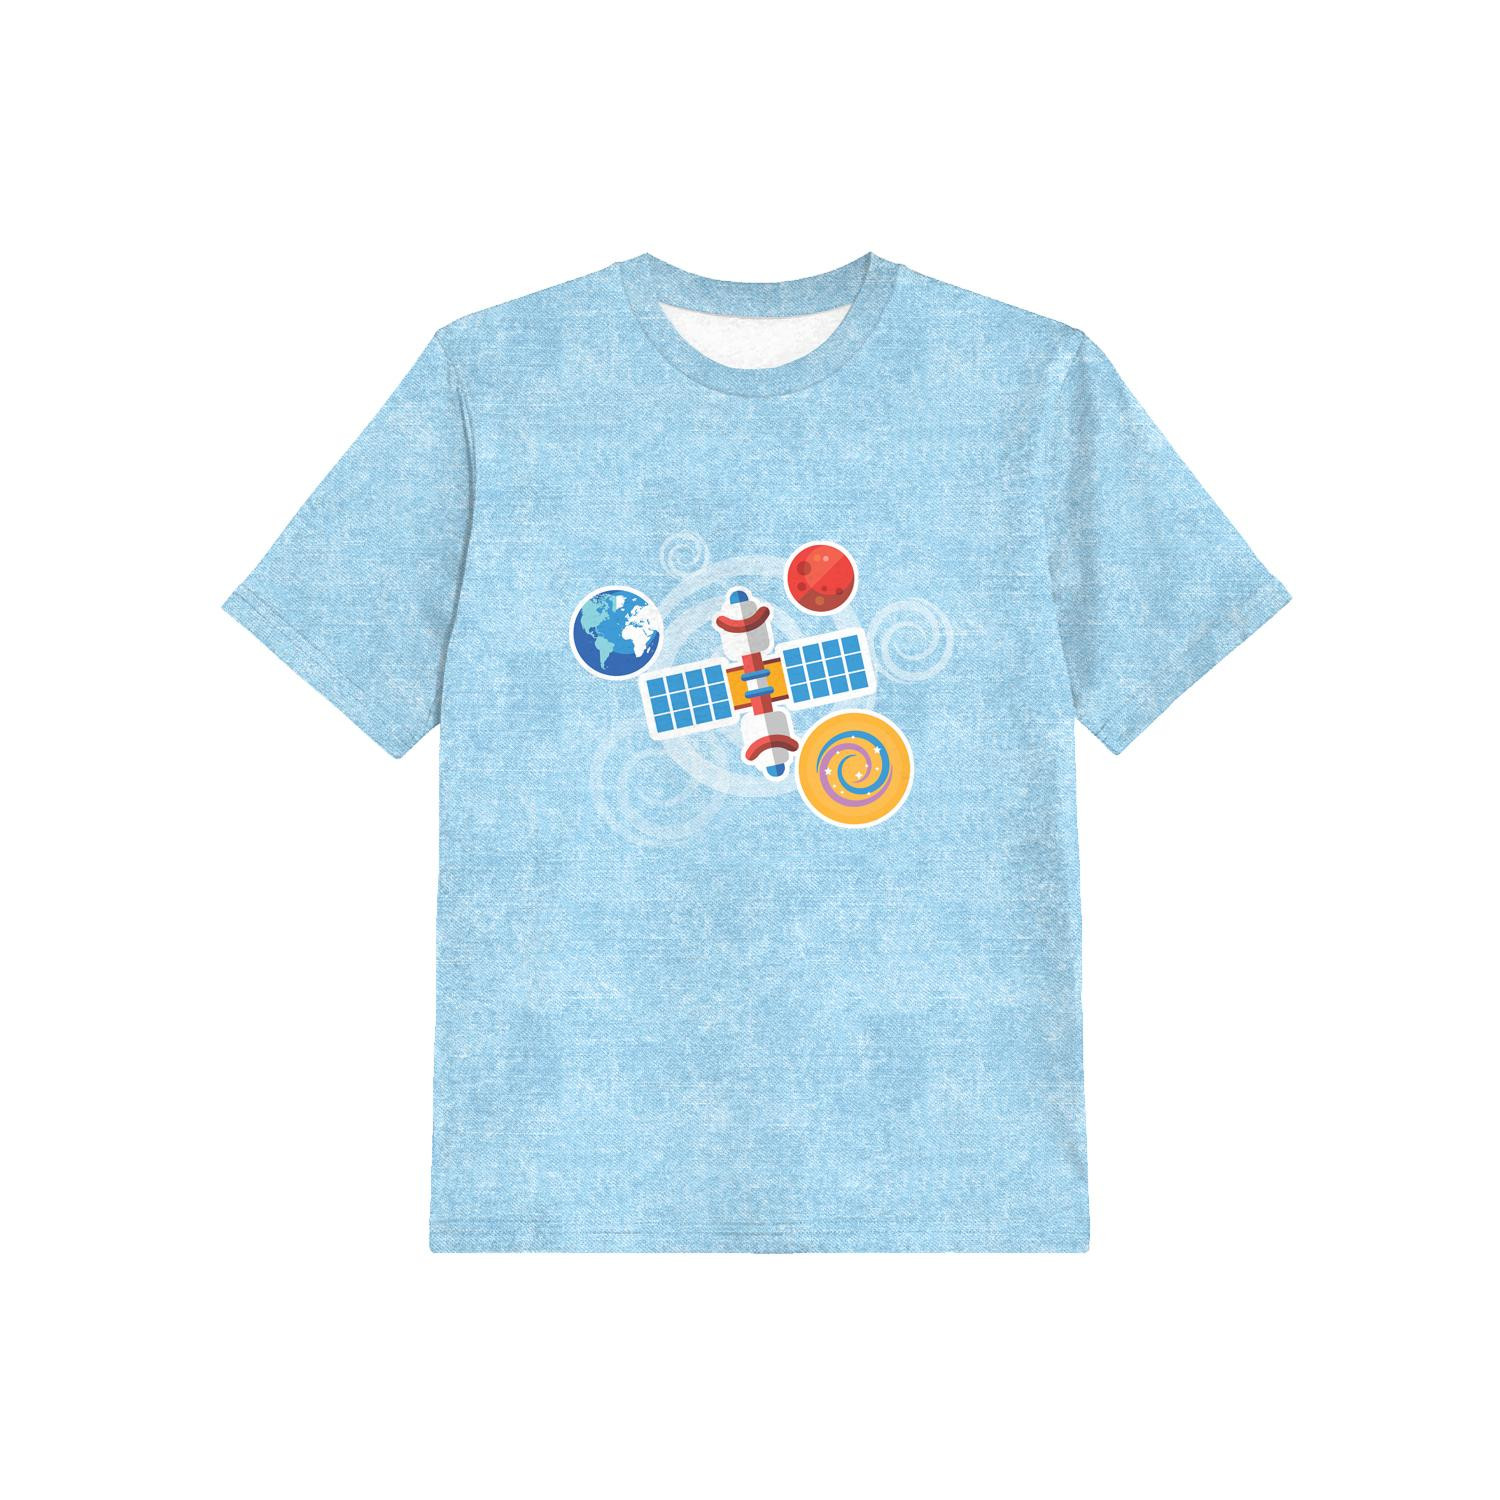 KID’S T-SHIRT - SATELLITE (SPACE EXPEDITION) / ACID WASH LIGHT BLUE - single jersey